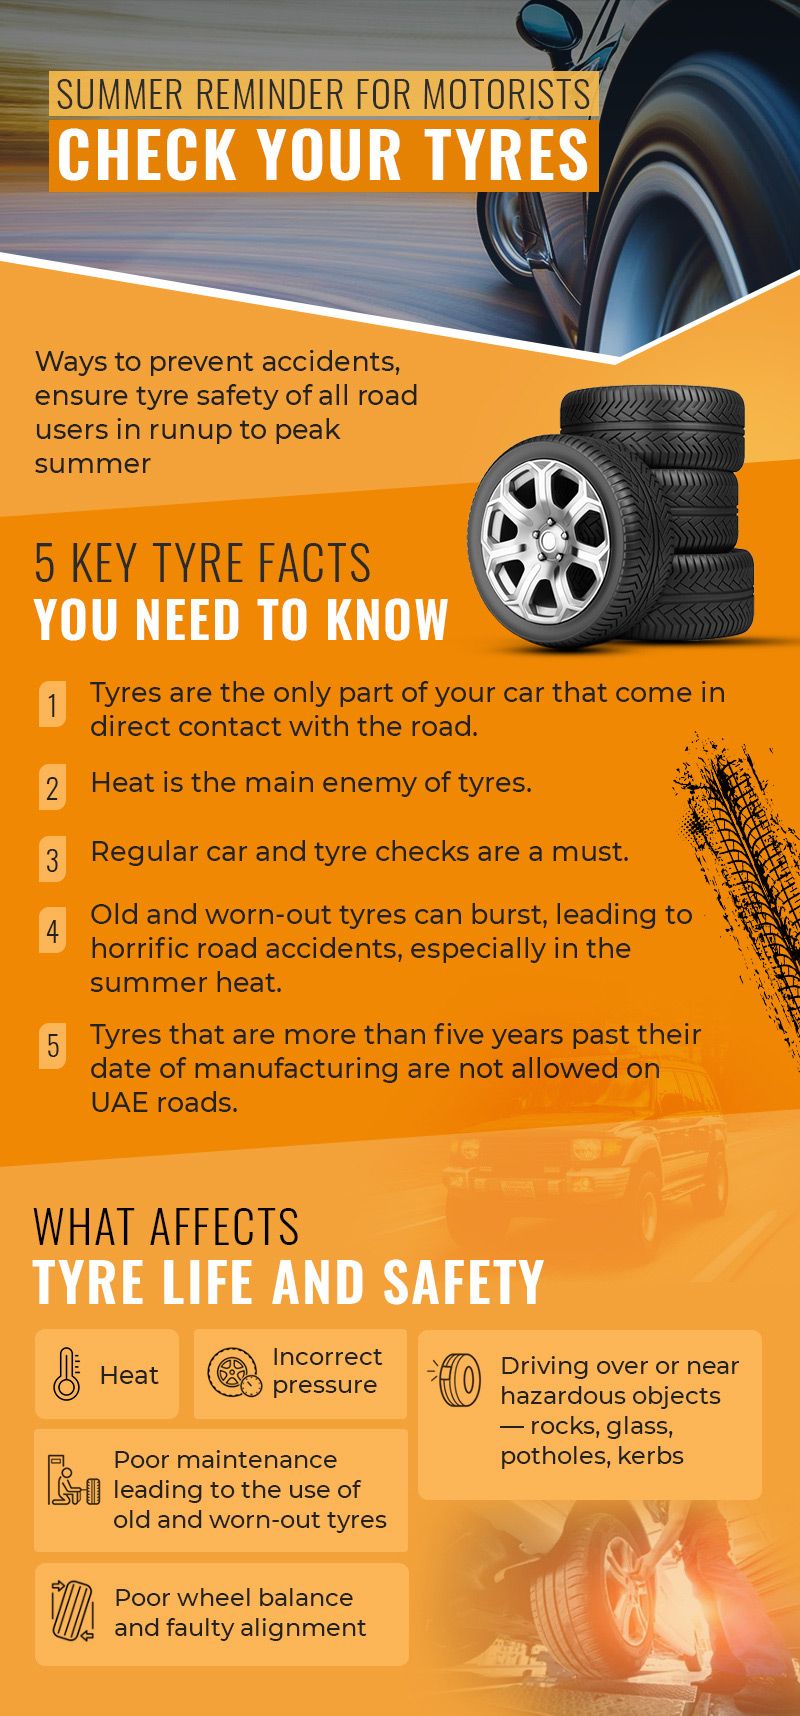 Tyre safety